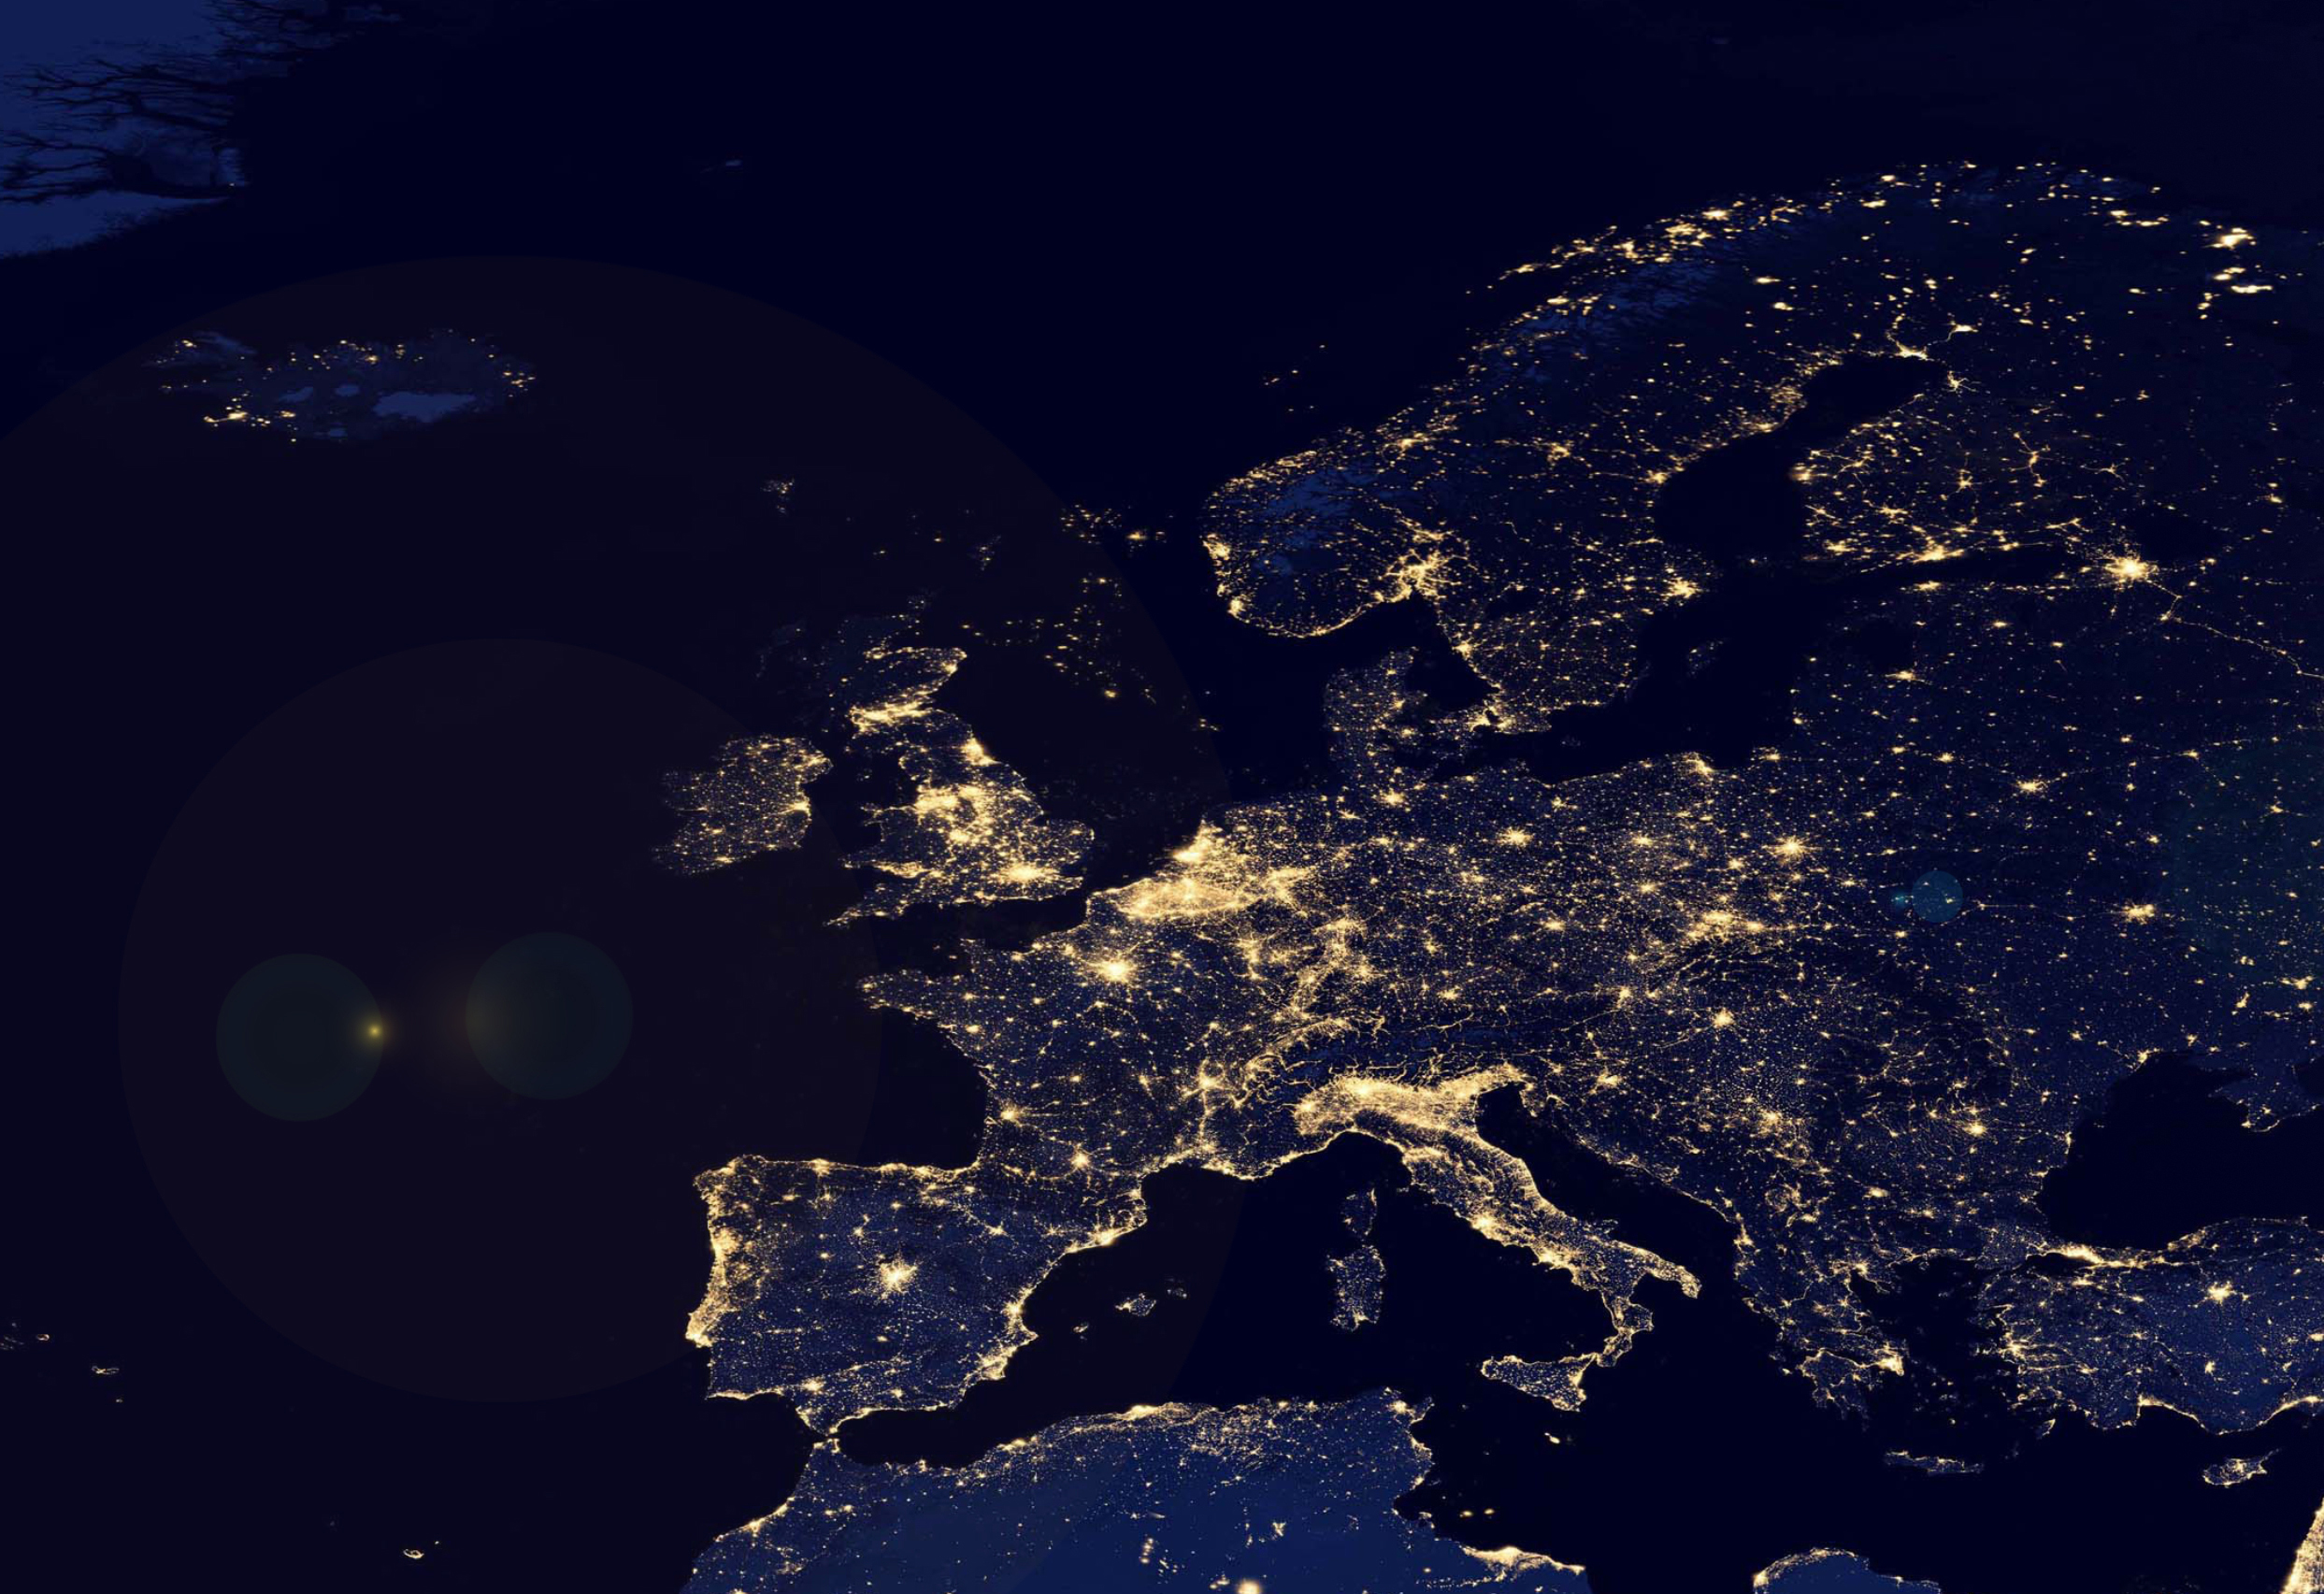 Shedding light on energy in the EU